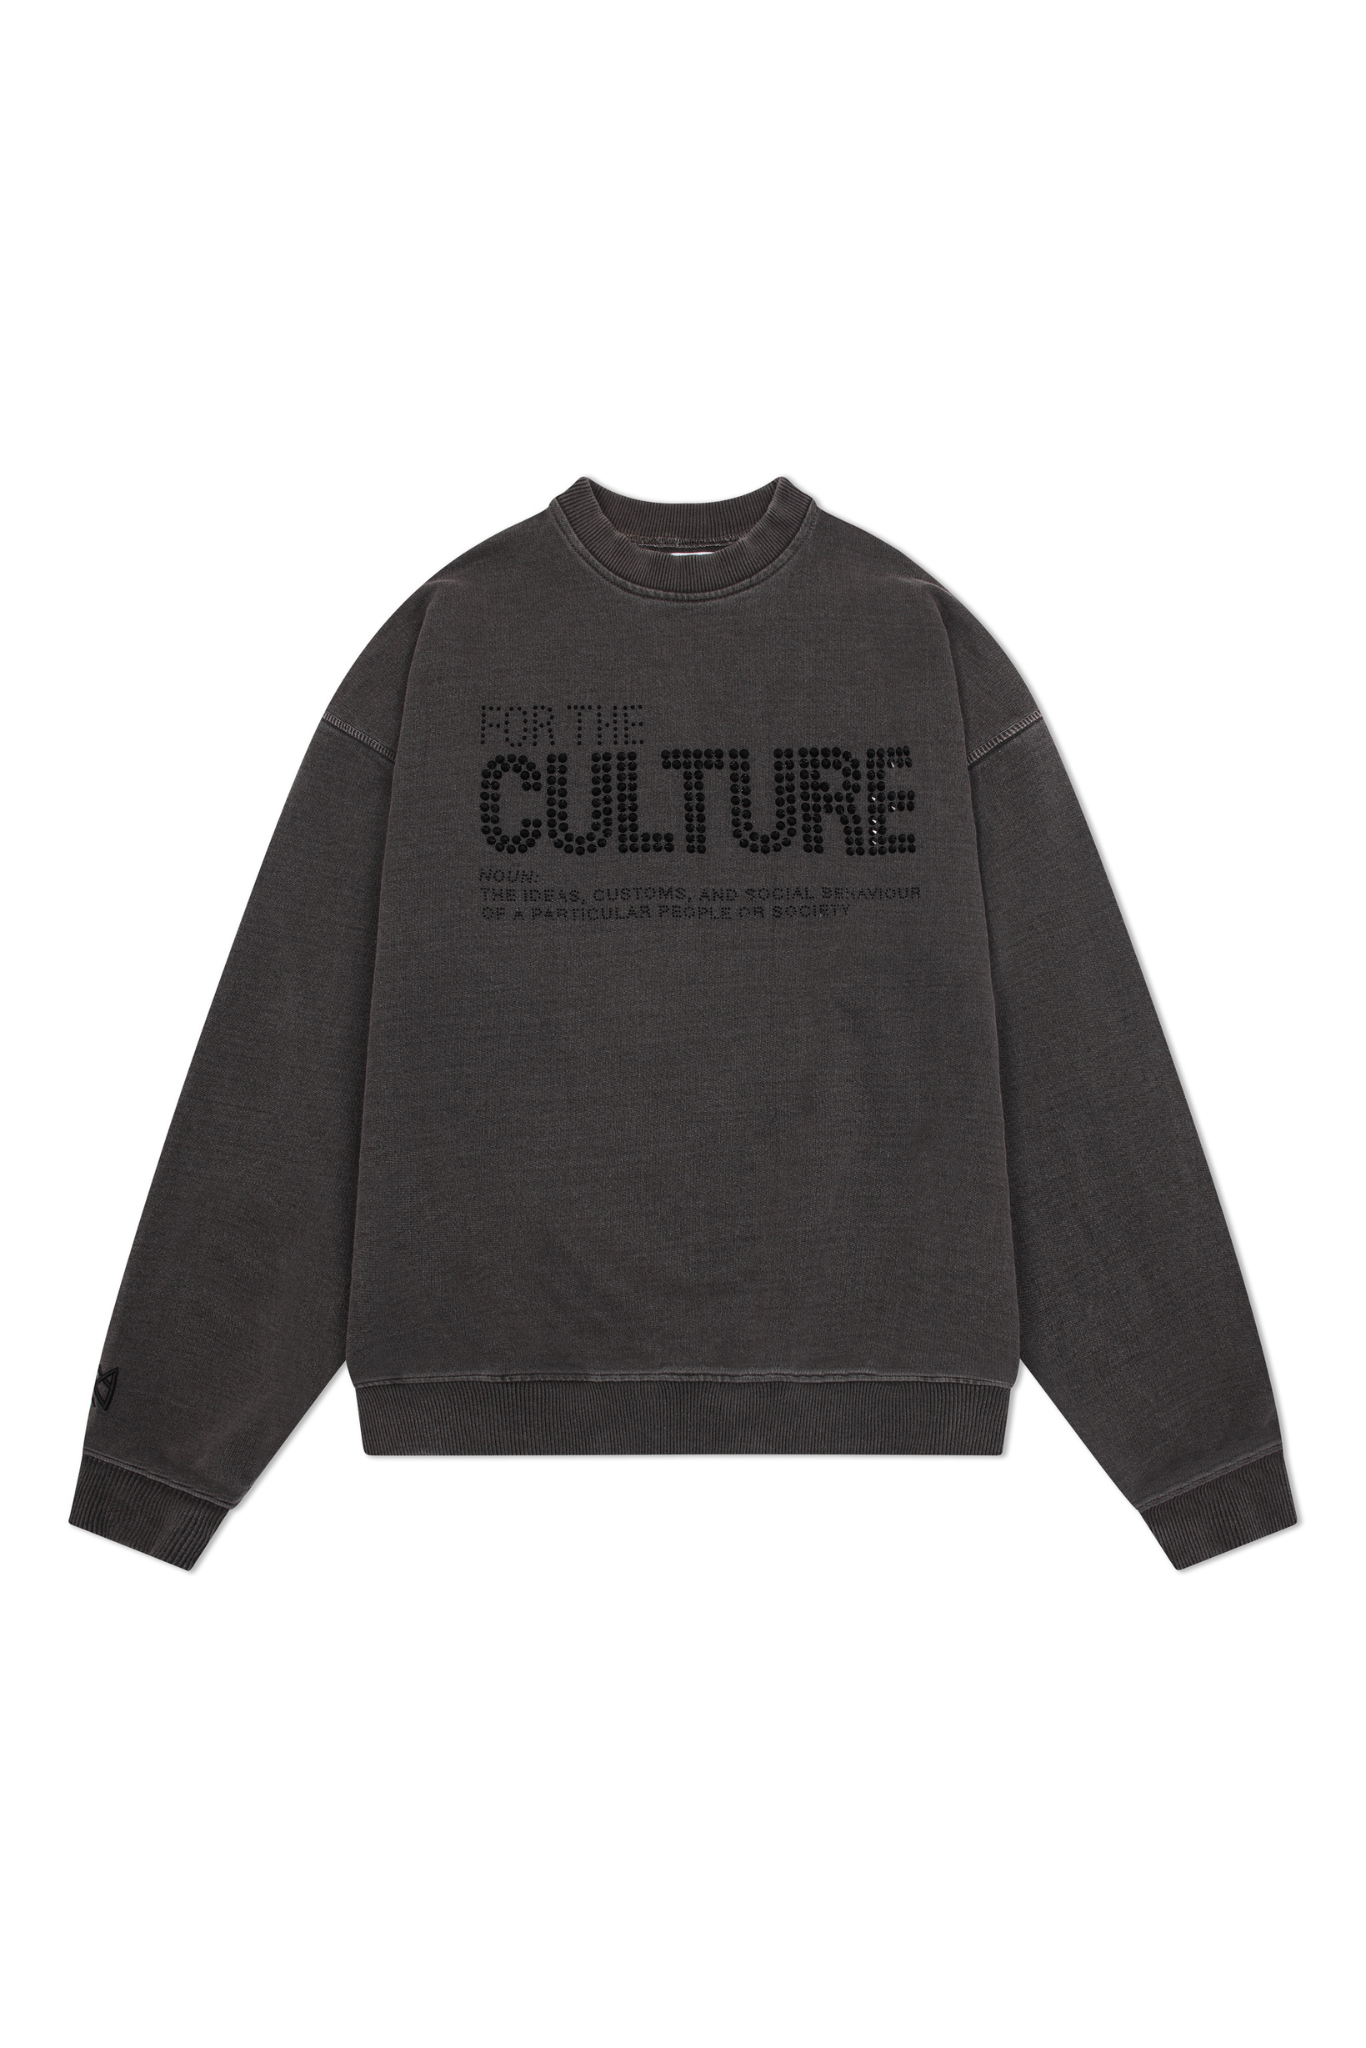 For The Culture Crystal Sweatshirt - Charcoal